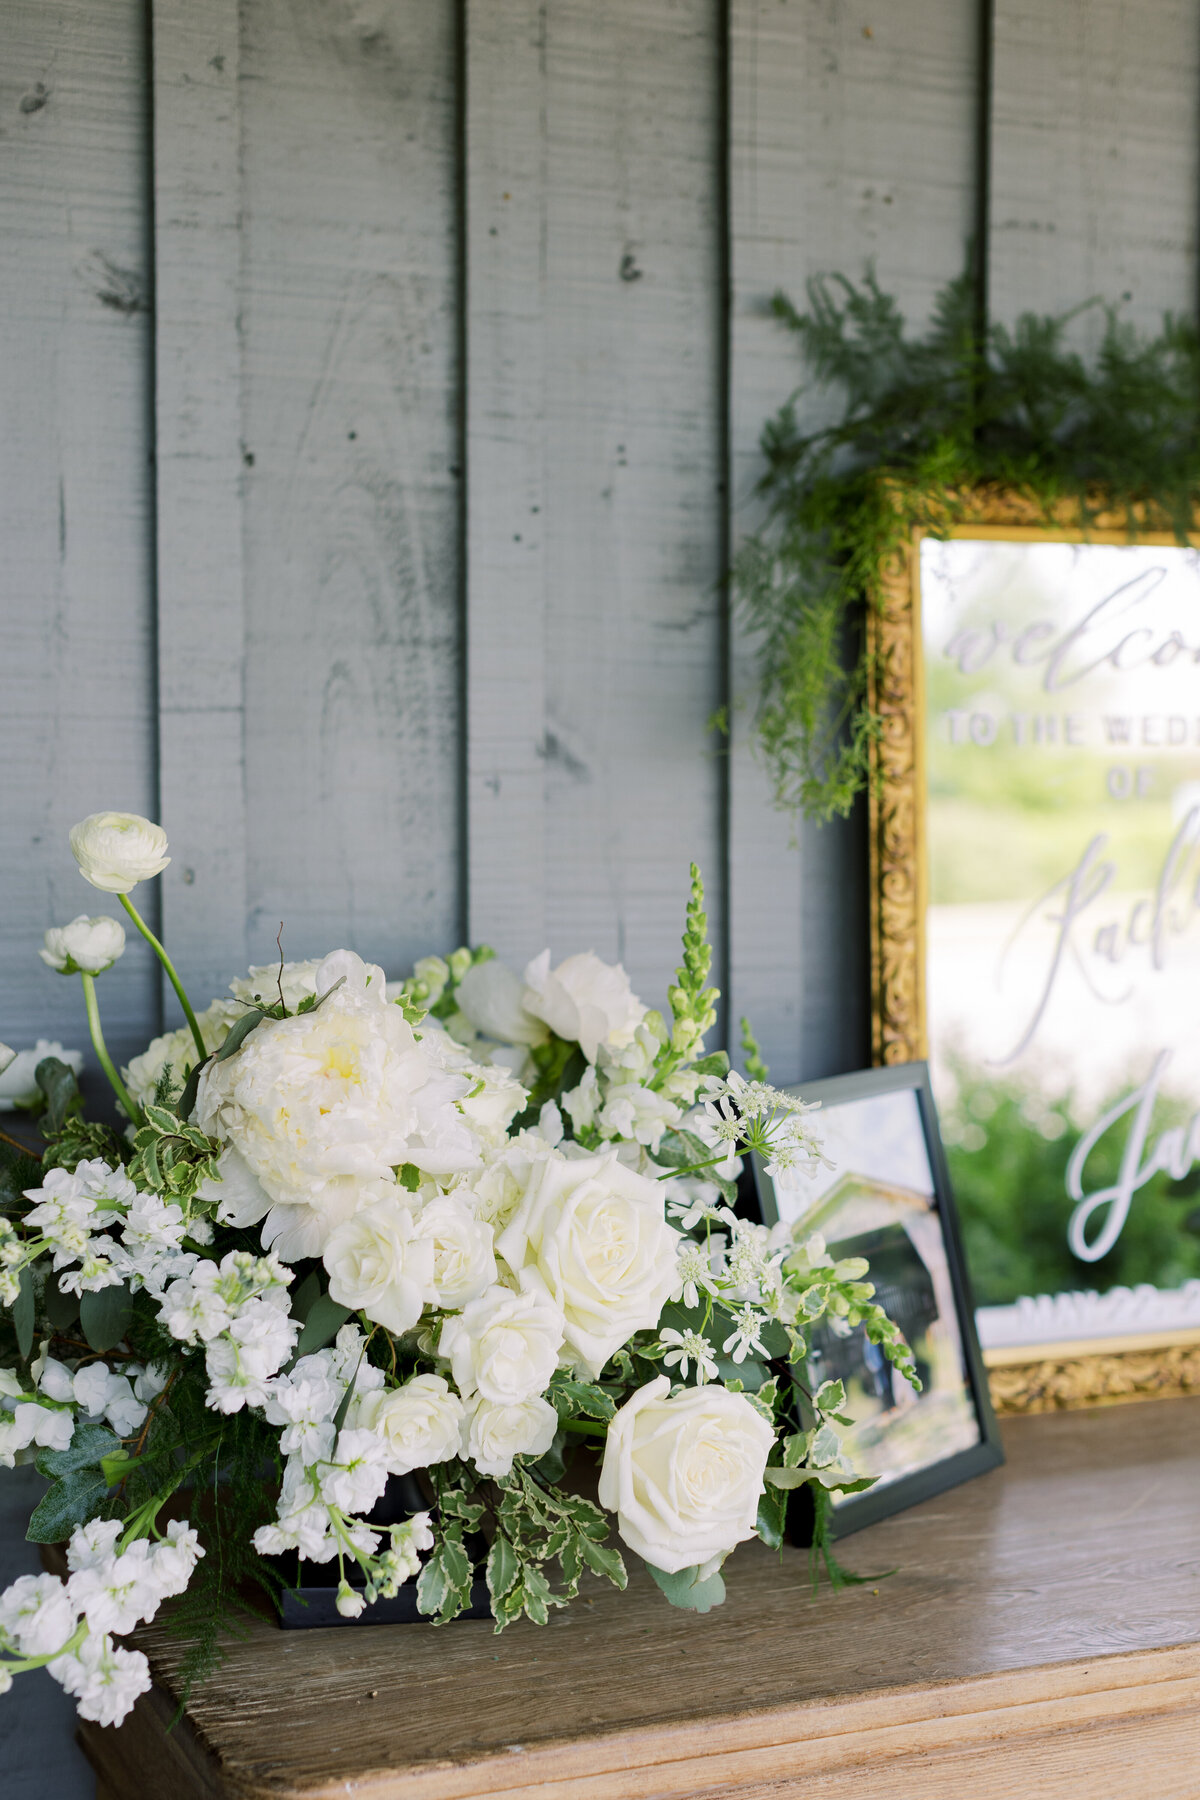 white-and-green-arrangement-at-wedding